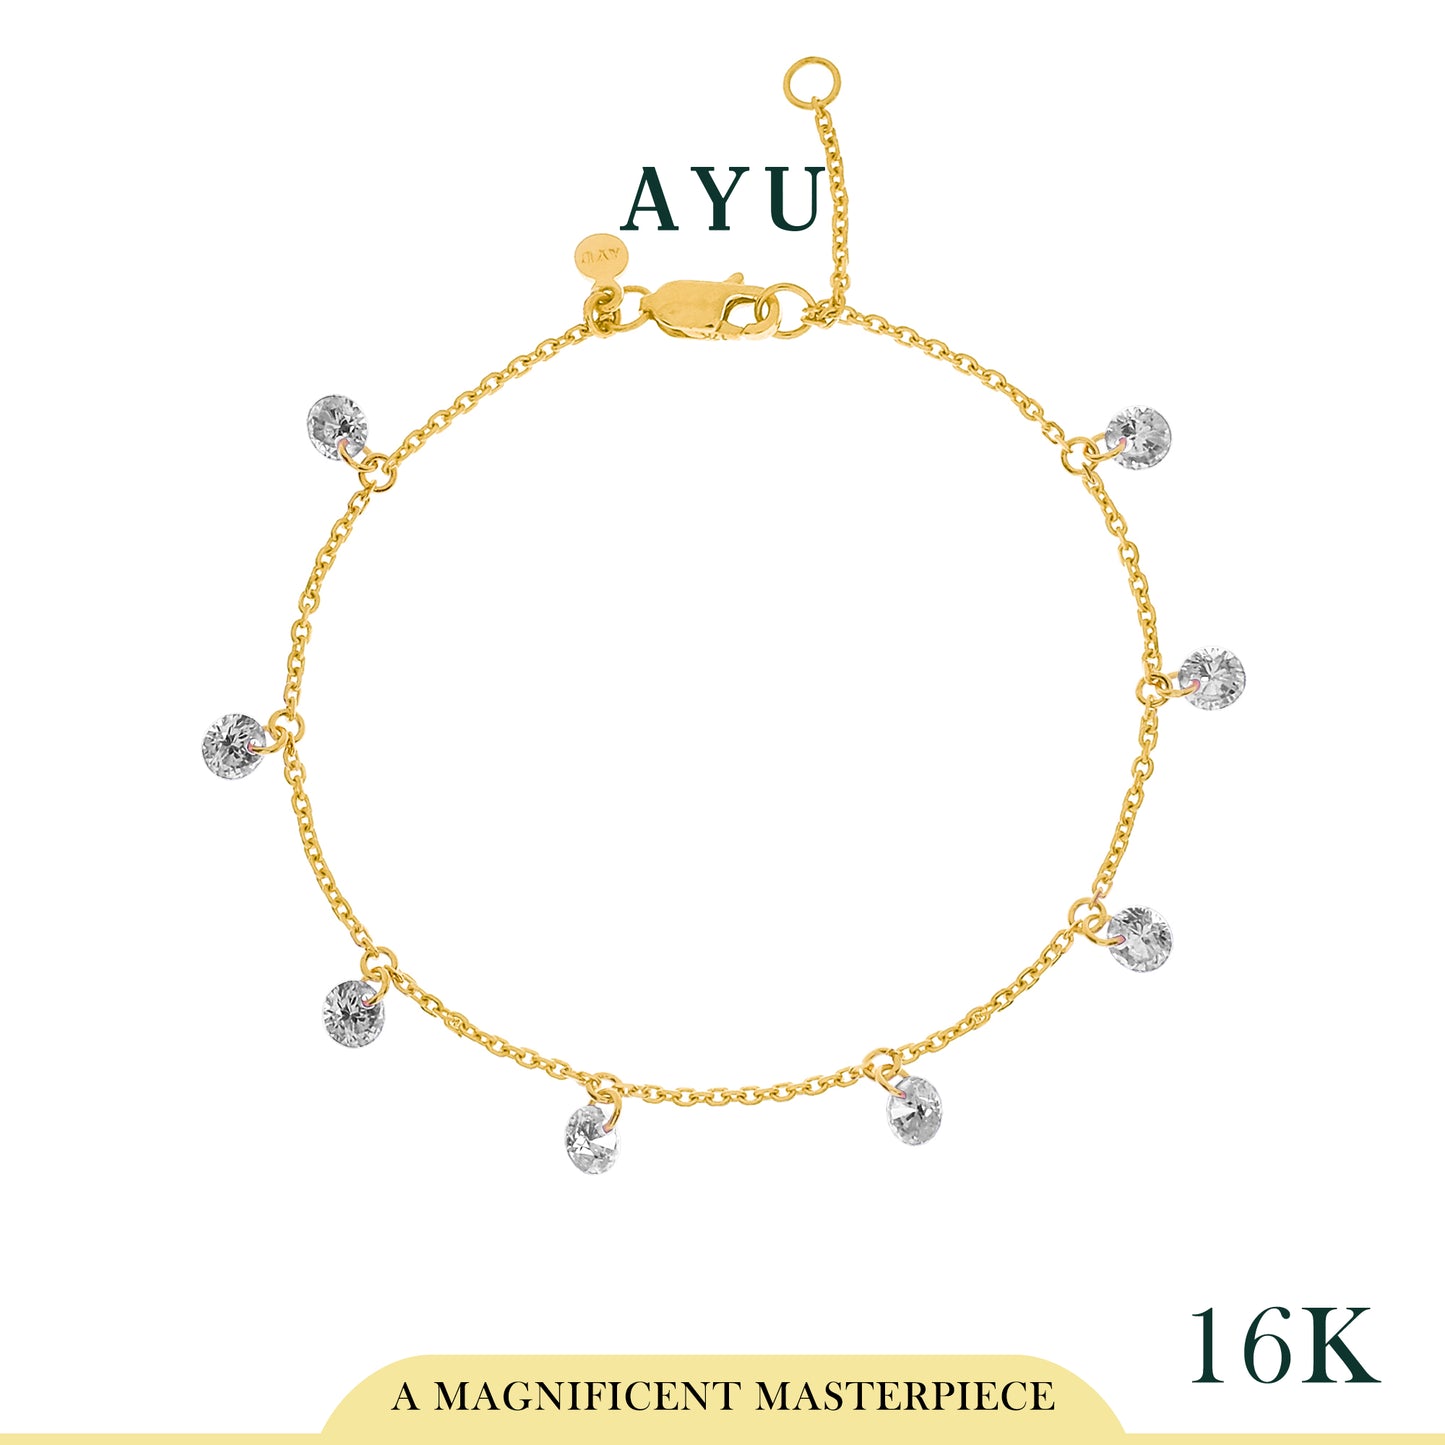 AYU 8 CANDY POP CHAIN ANKLET 16K YELLOW GOLD